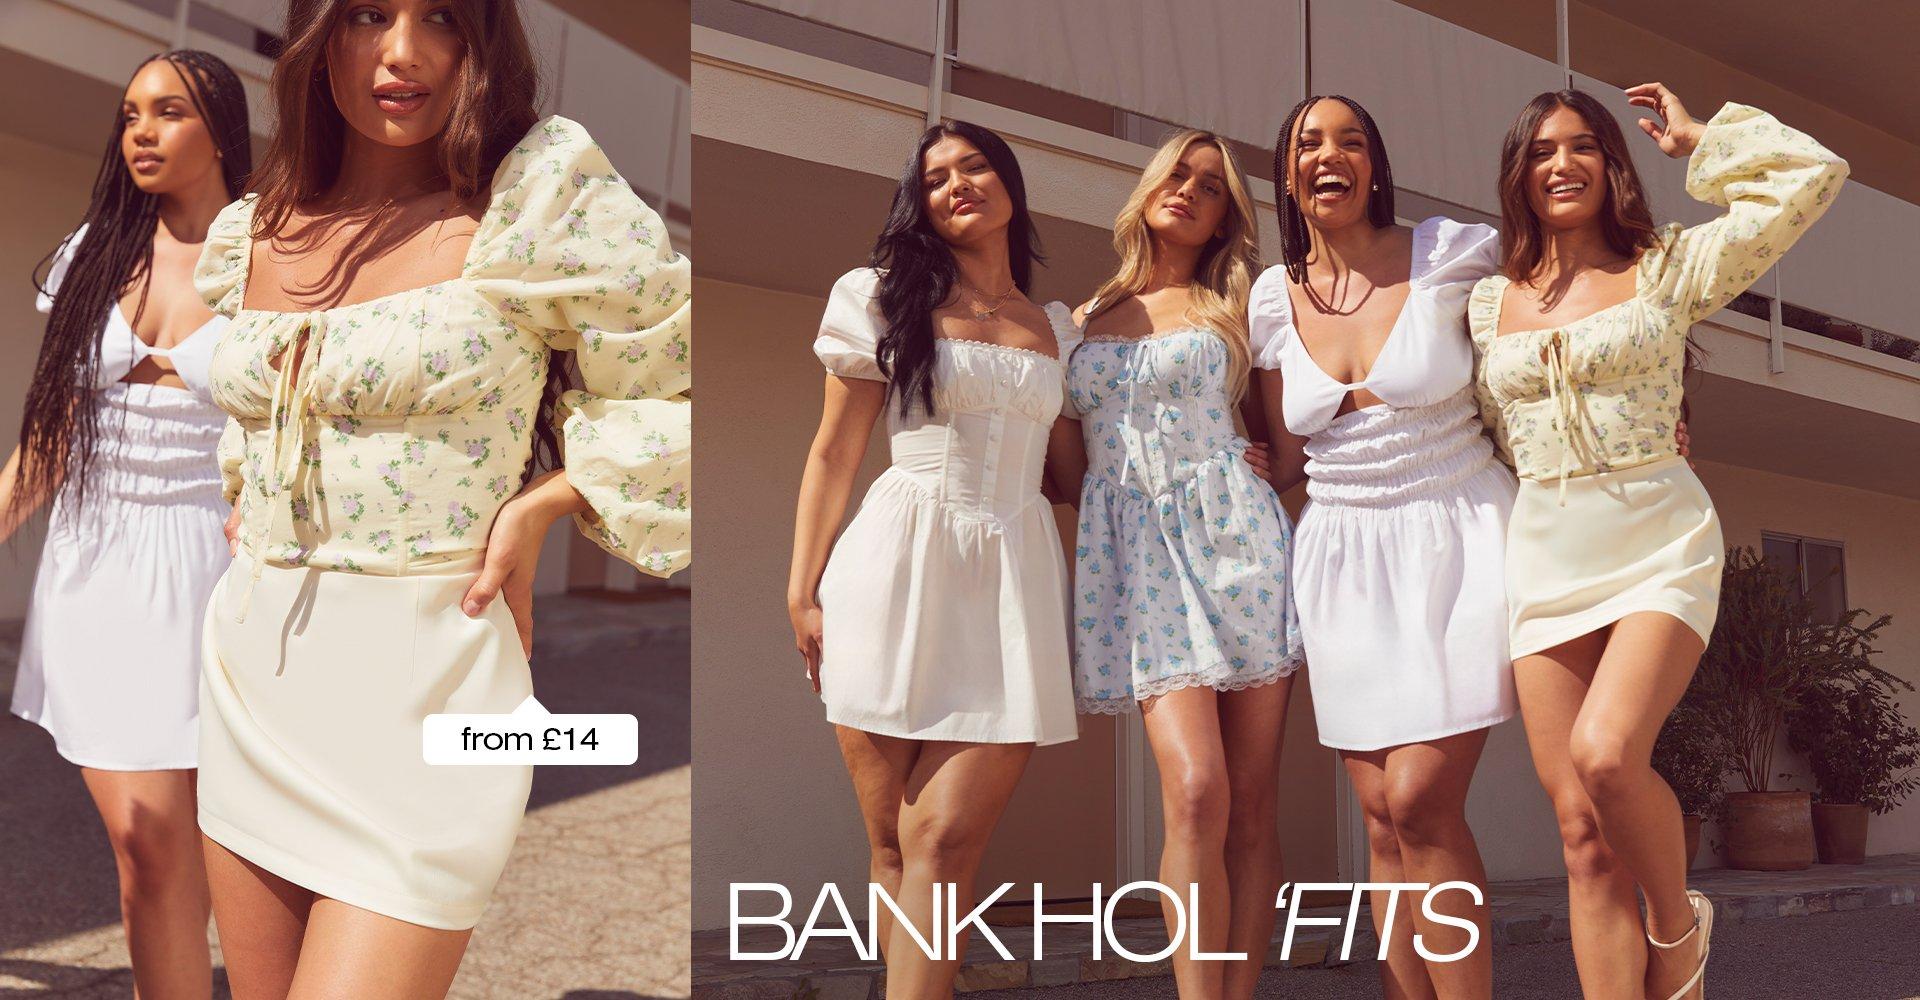 Bank Hol fits style £14